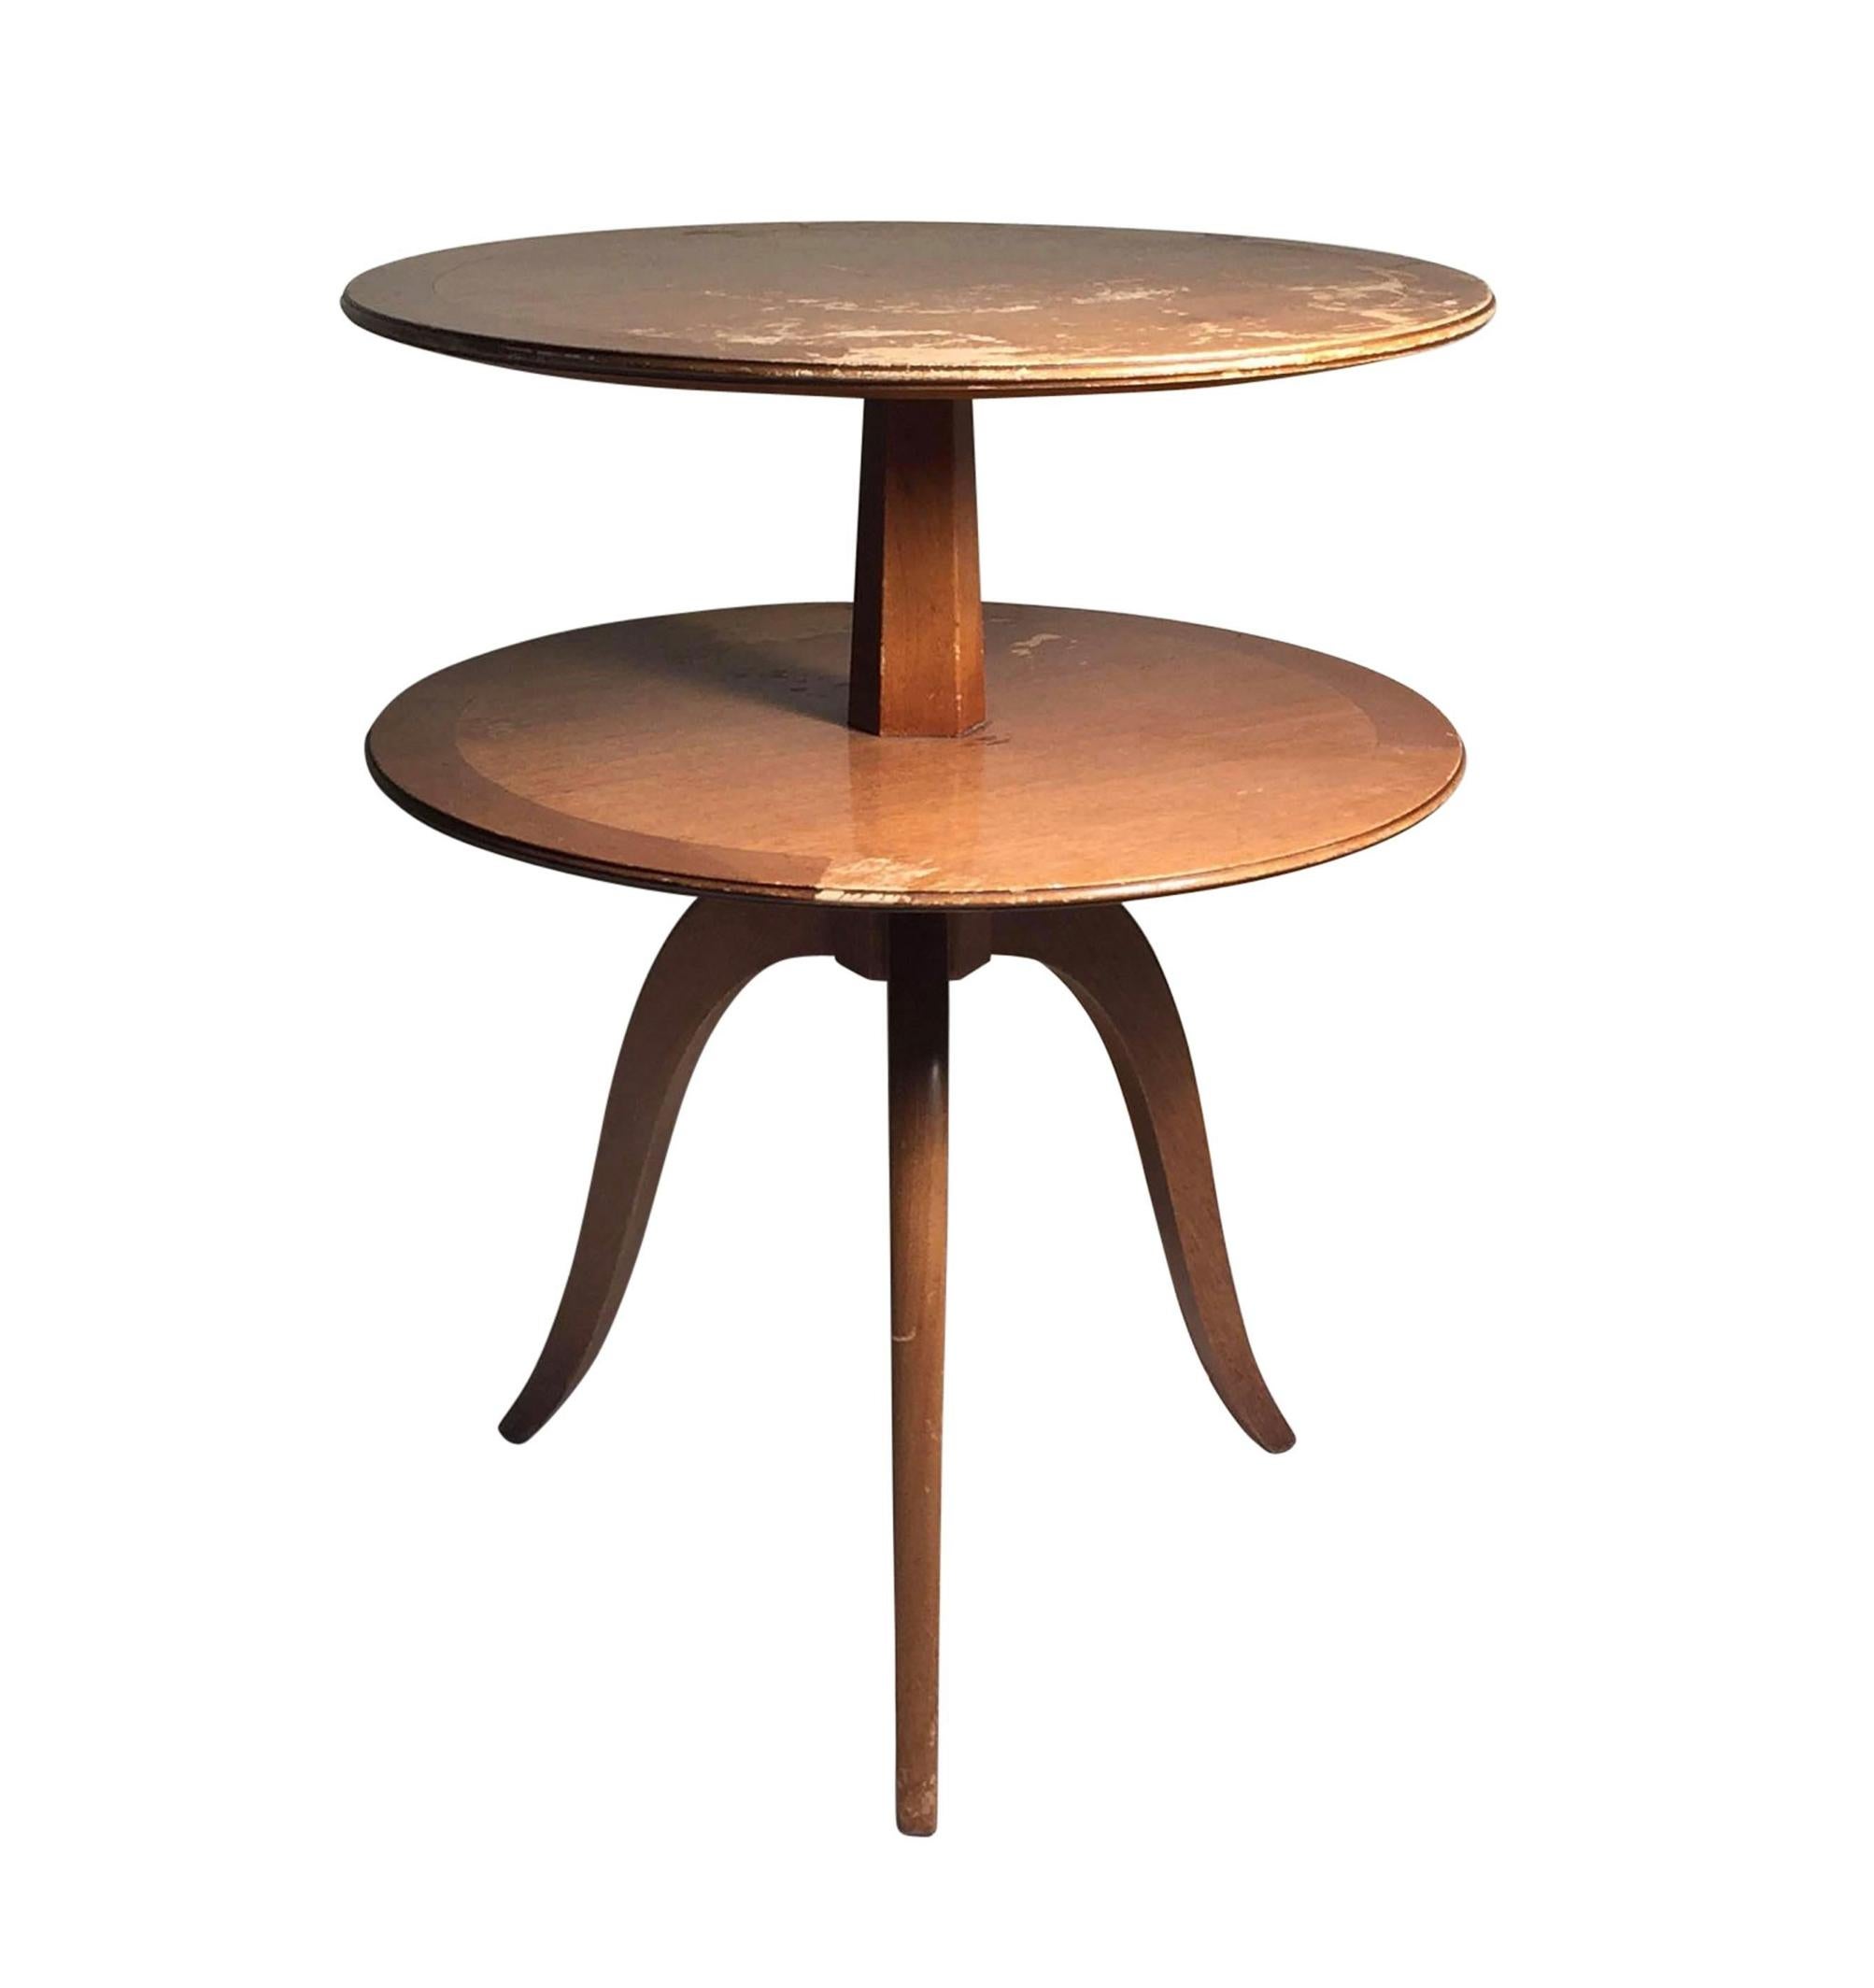 Edward Wormley side table for Dunbar. The scarcer form with two-tier tabletop.